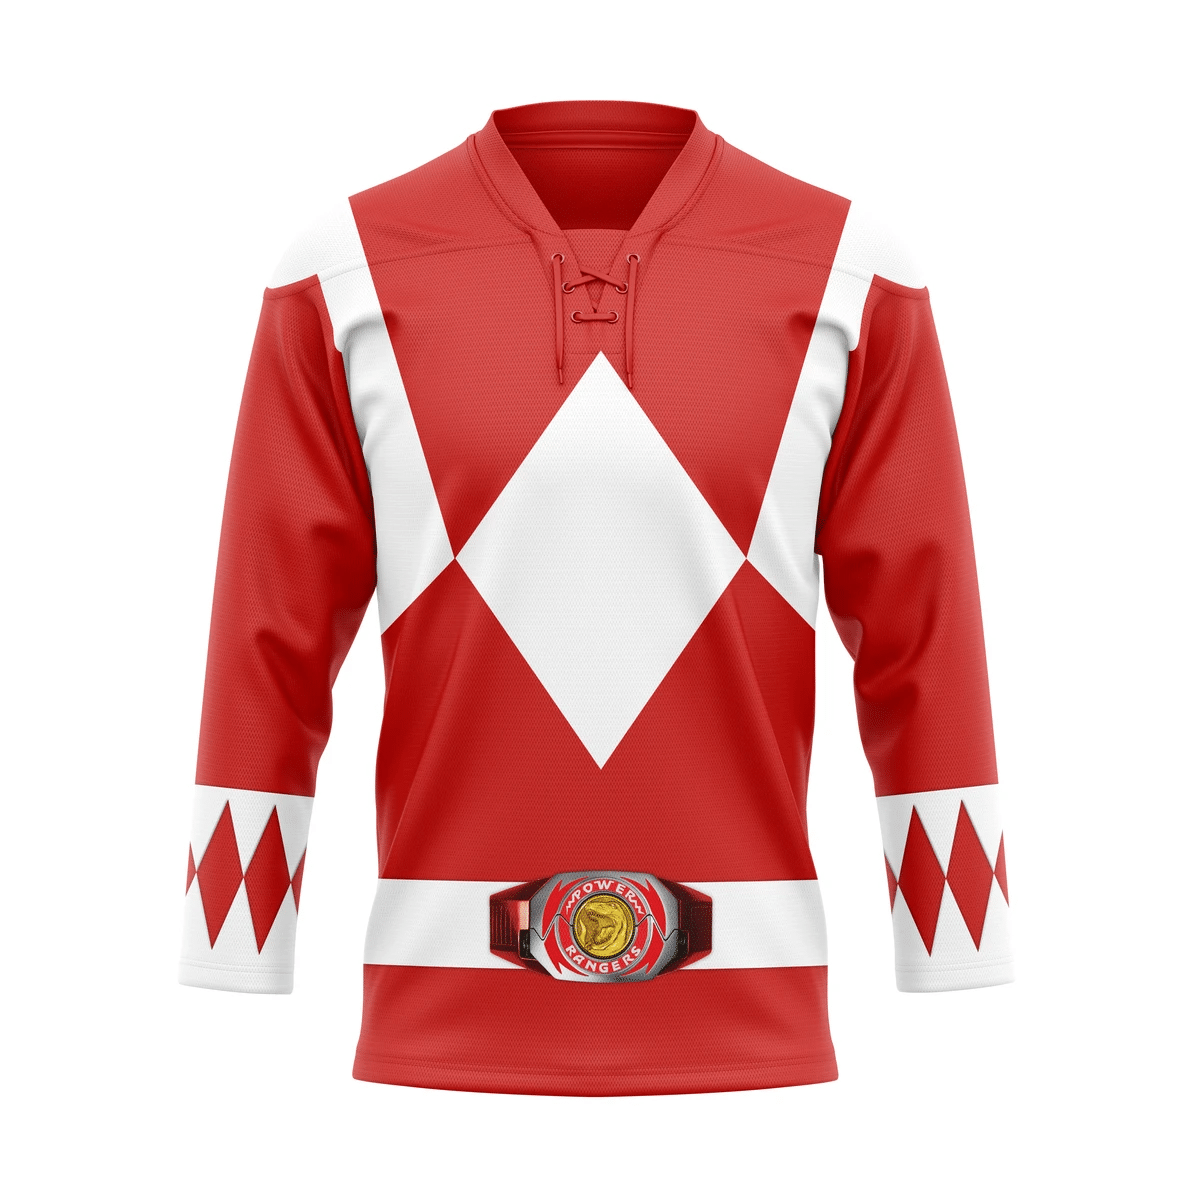 The style of a hockey jersey should match your personality. 136